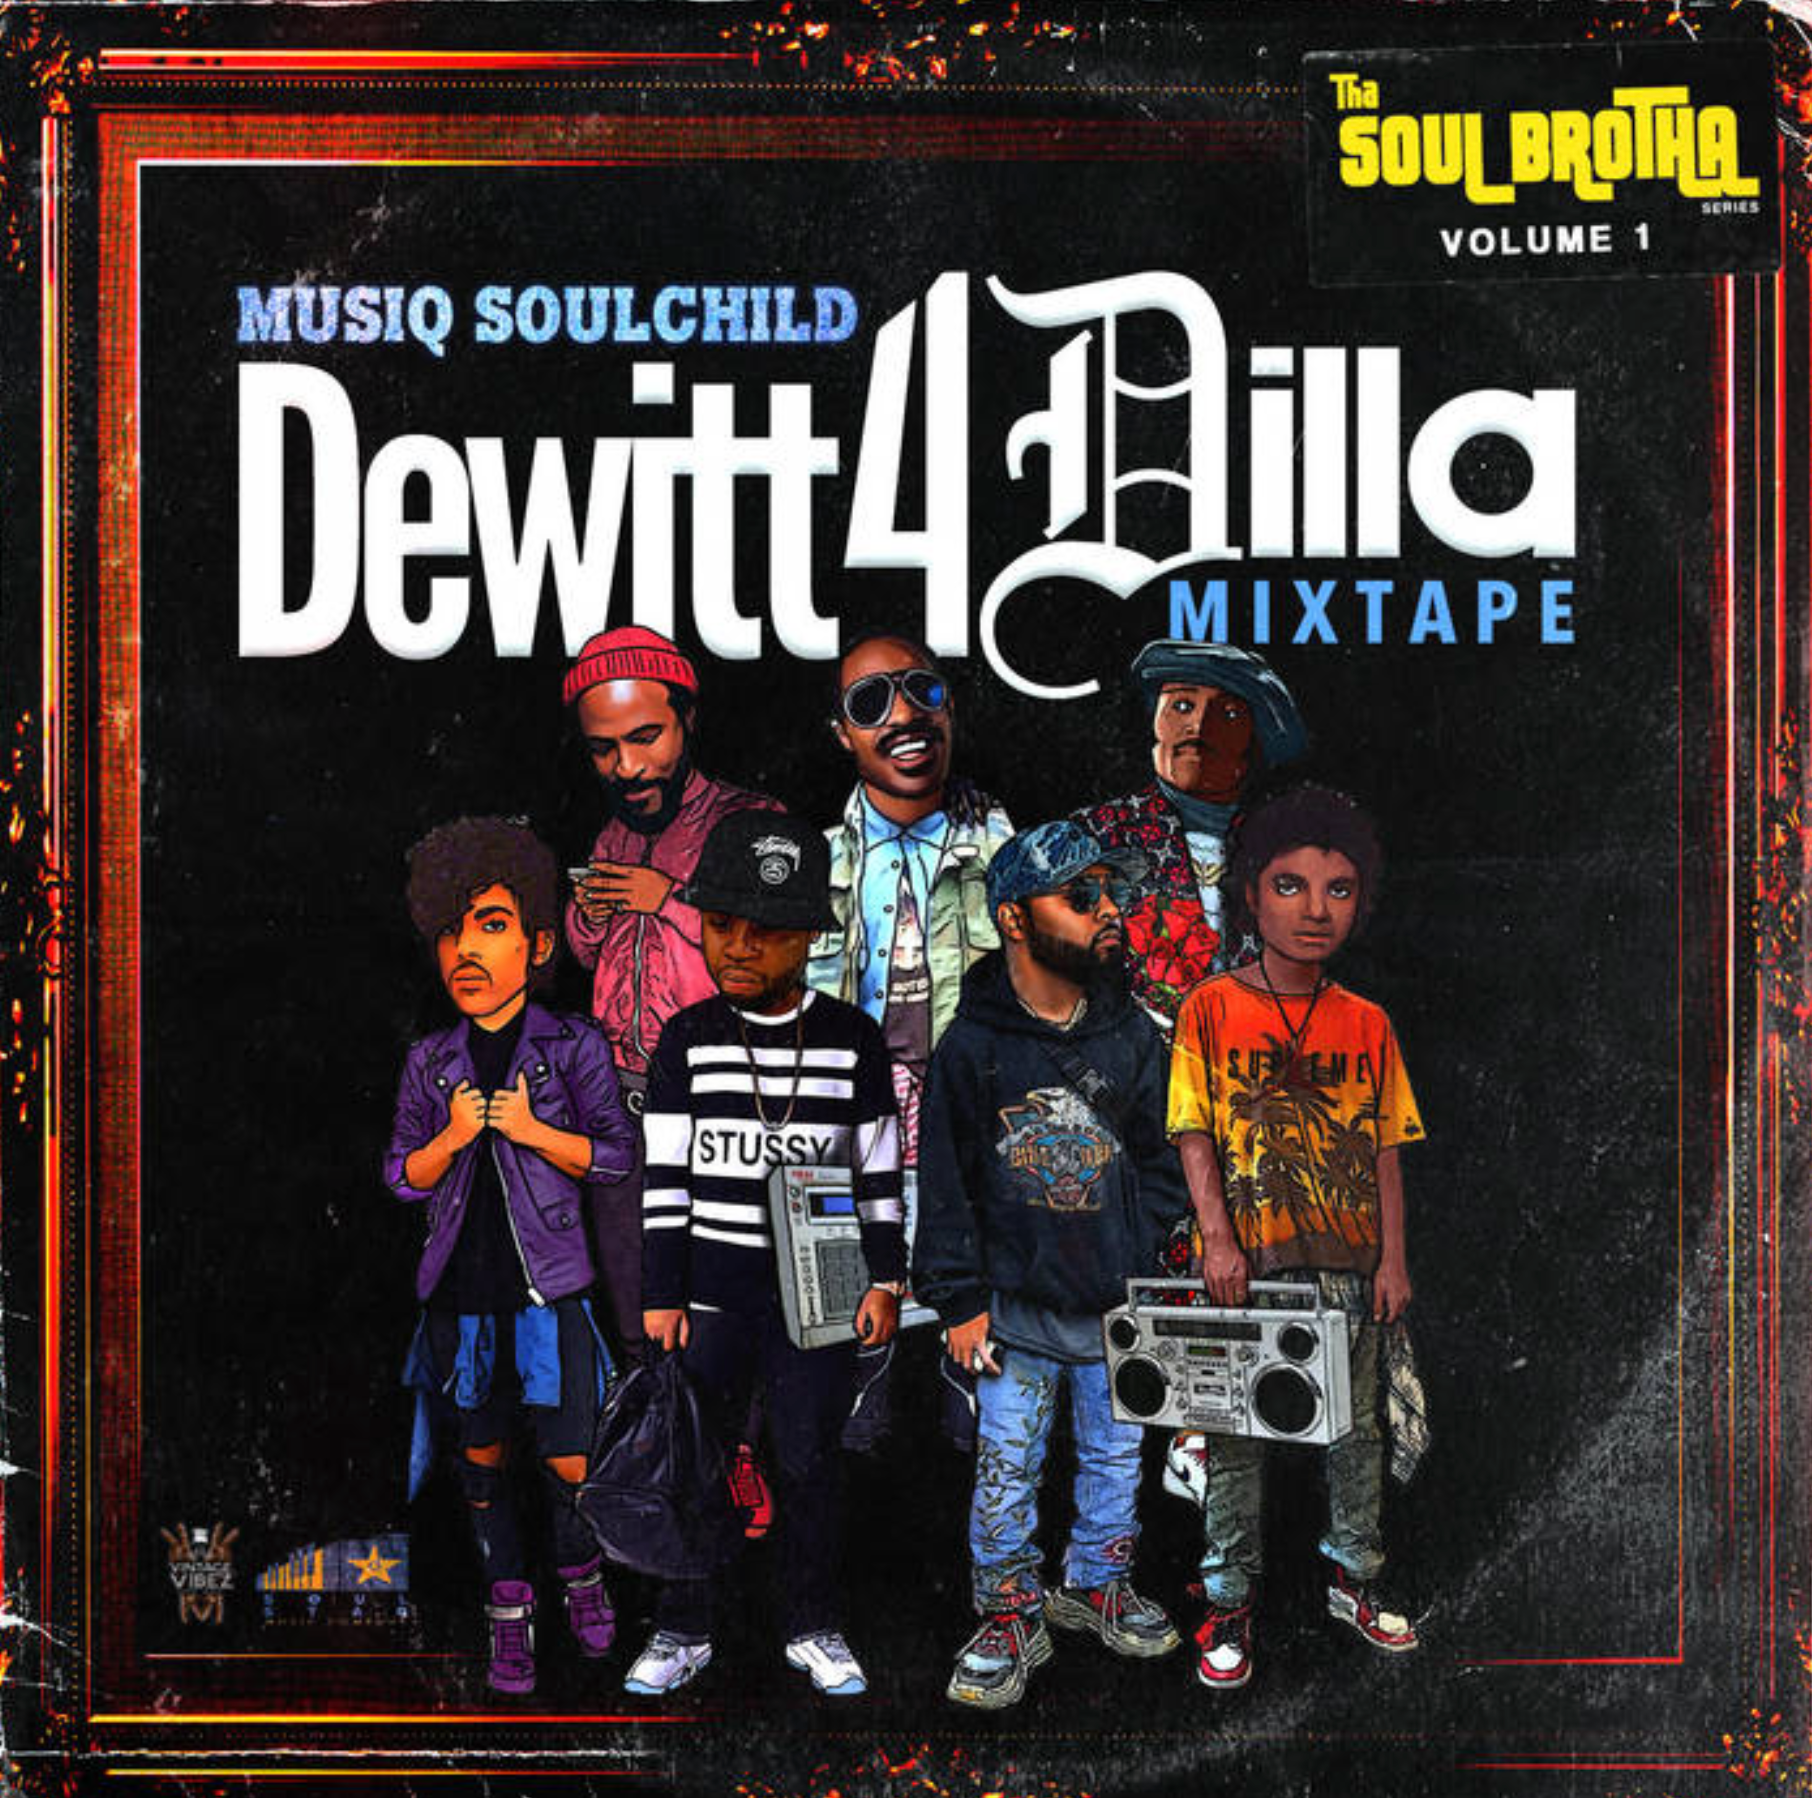 Musiq Soulchild Releases “Dewitt 4 Dilla” Mixtape With Cover Songs Inspired by J Dilla